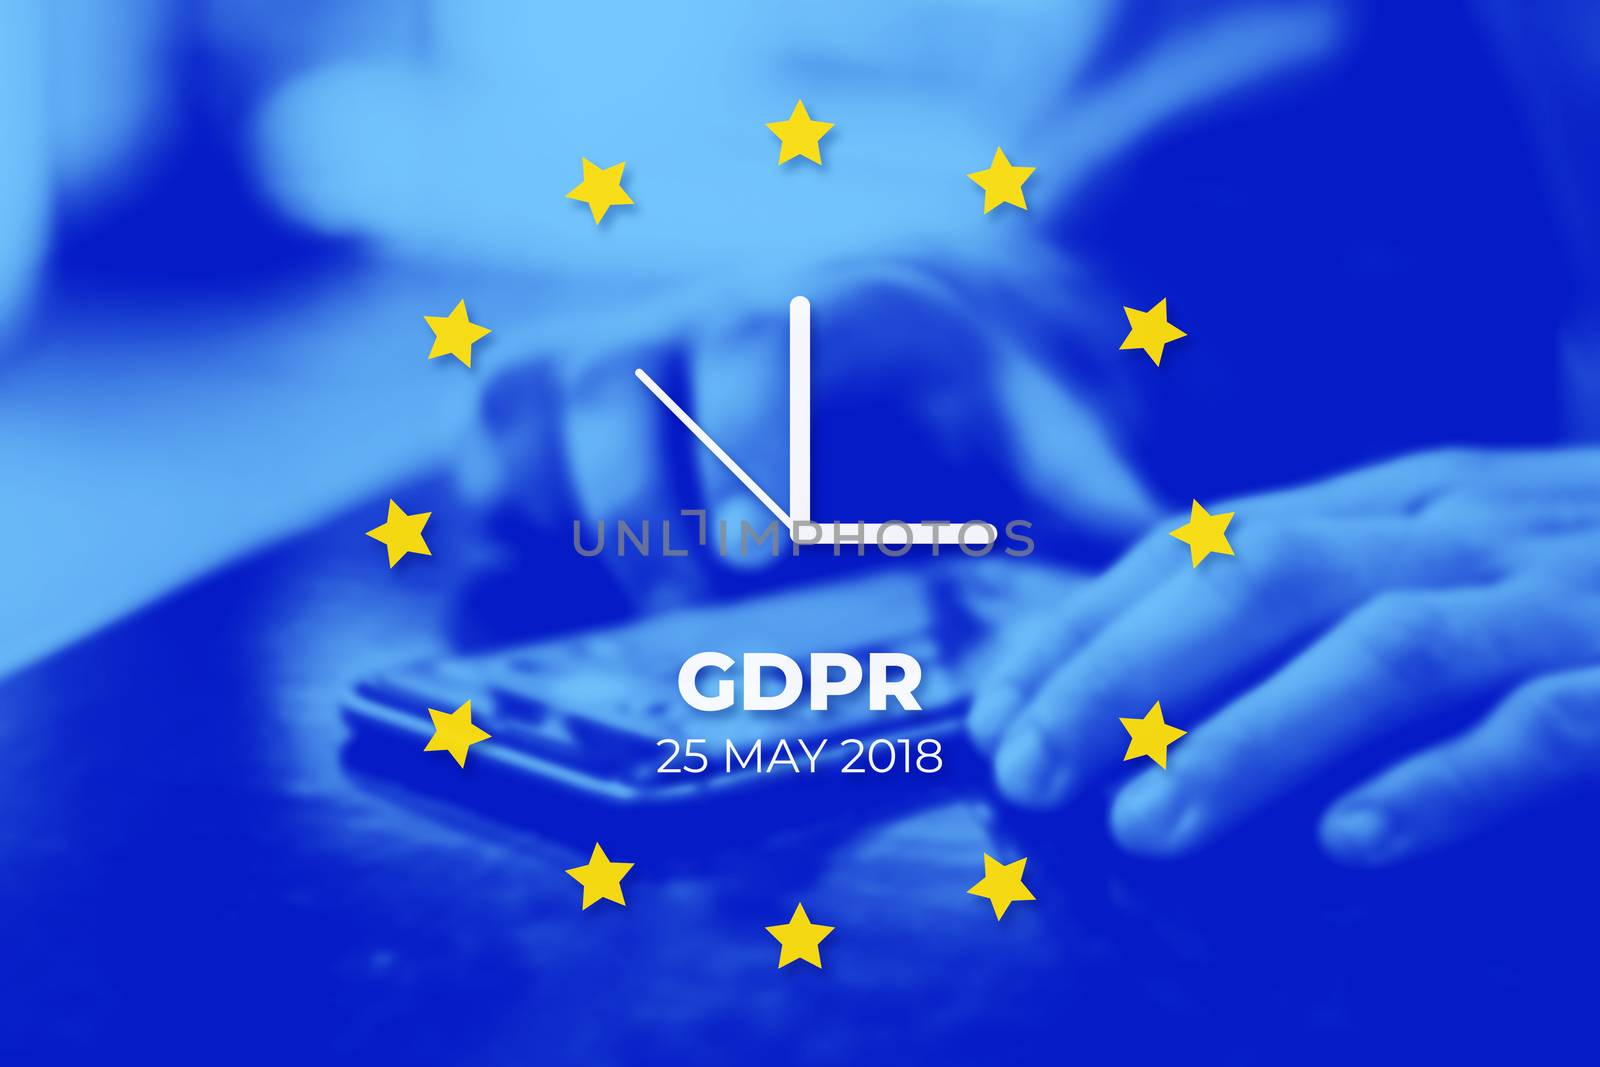 GDPR - General Data Protection Regulation. EU flag with clock, b by Softulka